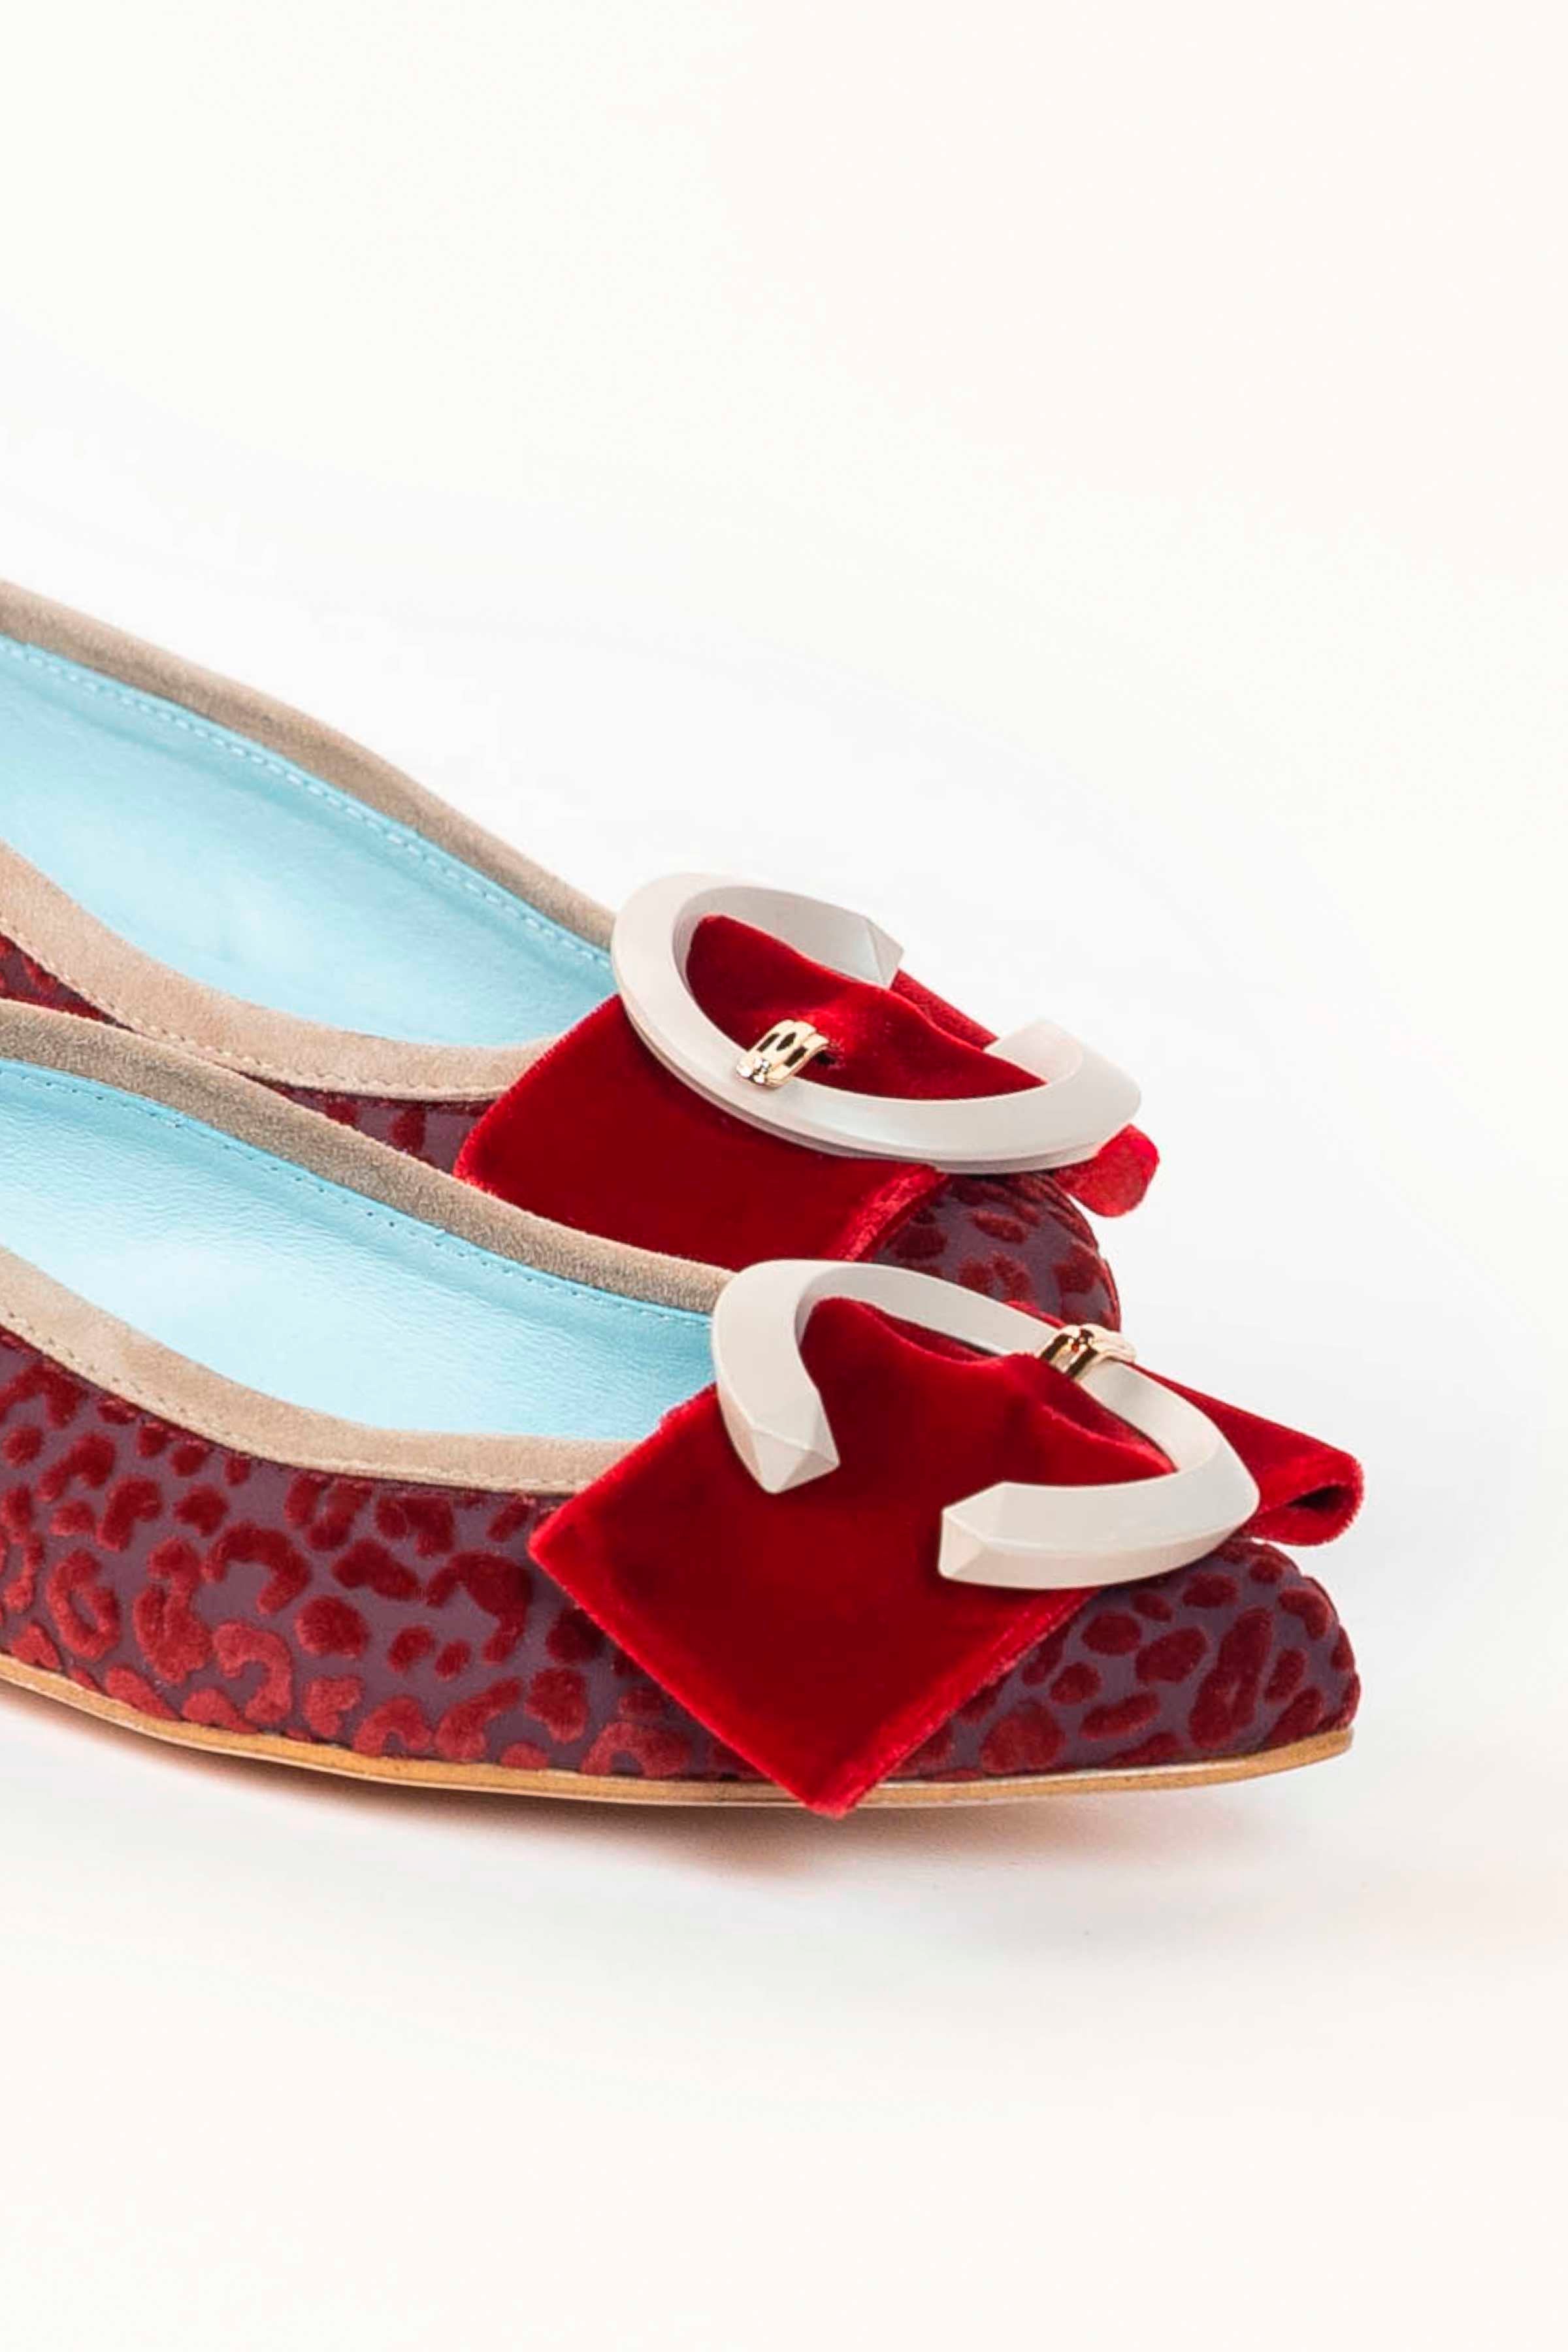 barcelona red ballerina (includes wool and leather insole)